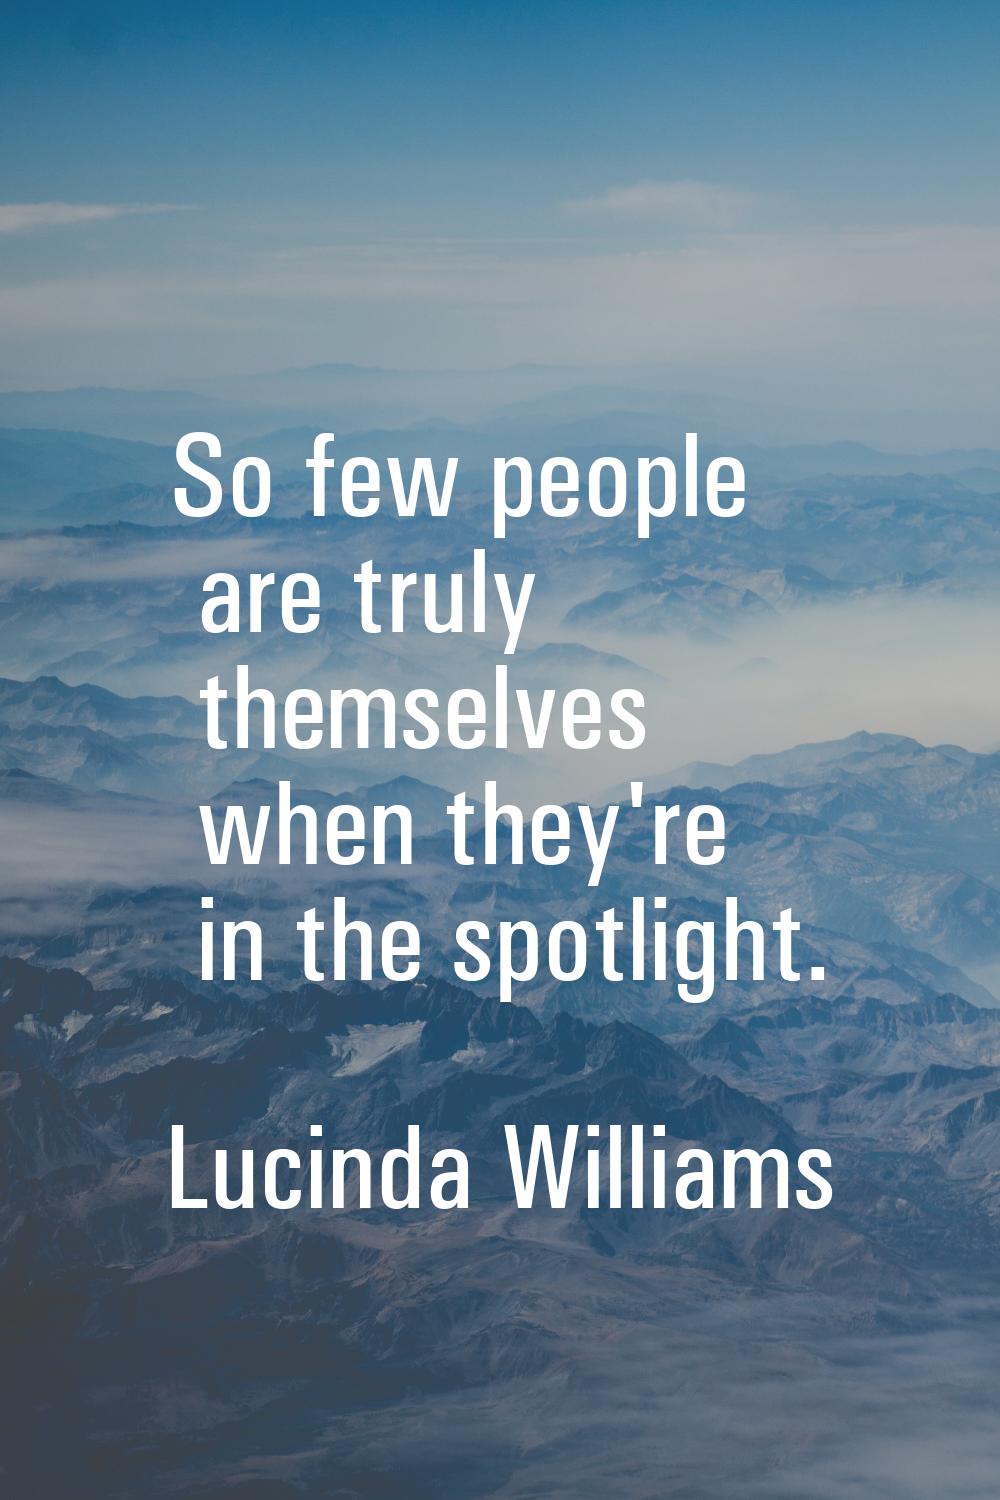 So few people are truly themselves when they're in the spotlight.